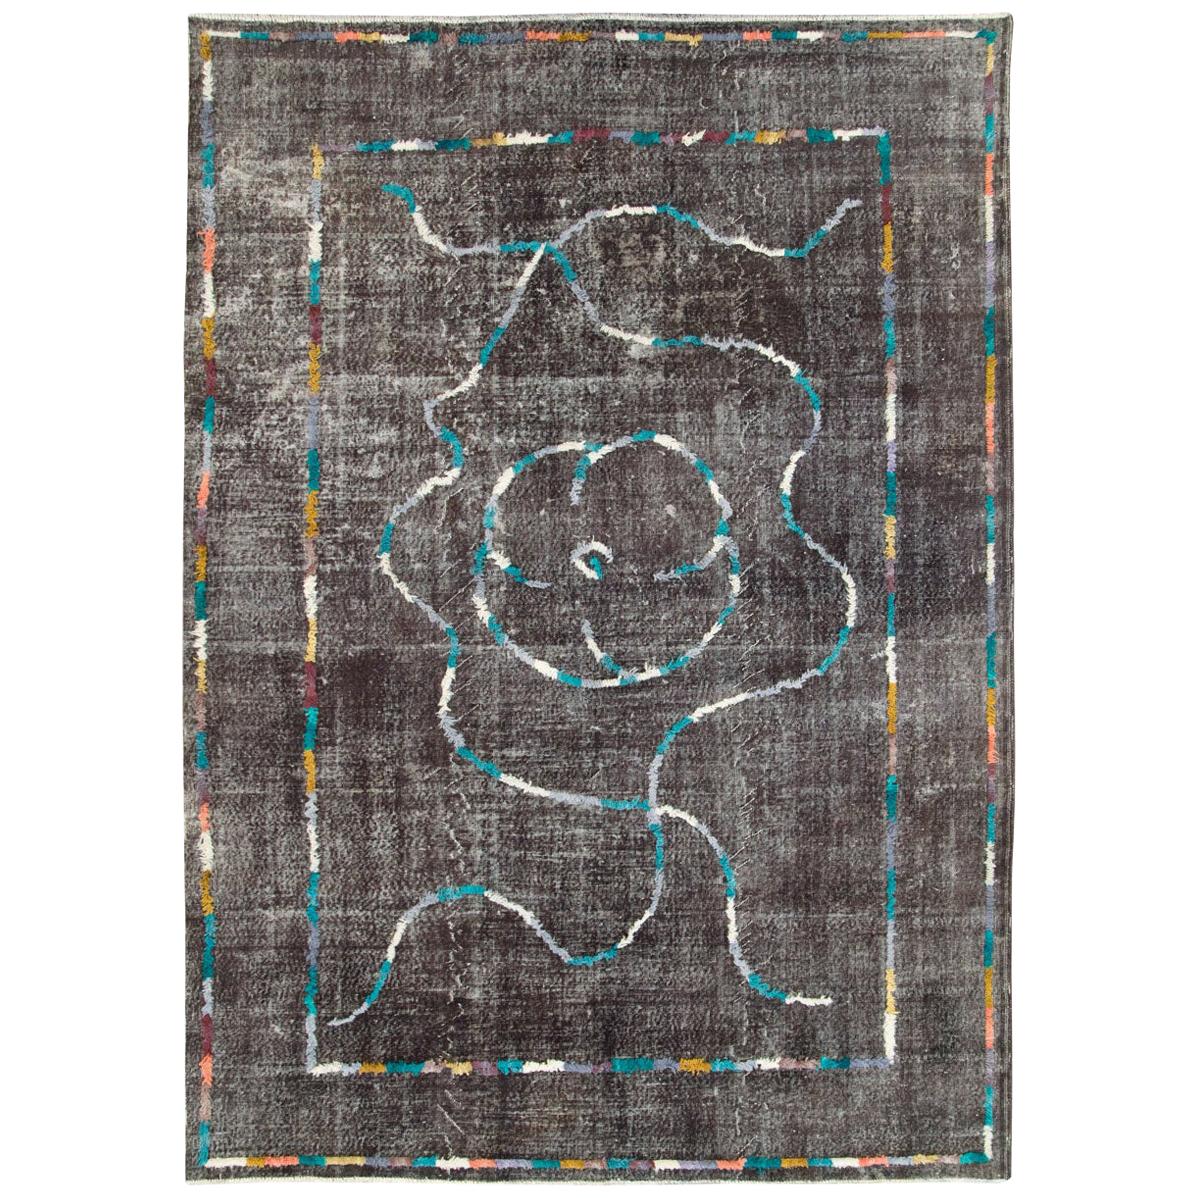 Contemporary Handmade Turkish Folk Rug with a Distressed Appeal in Charcoal